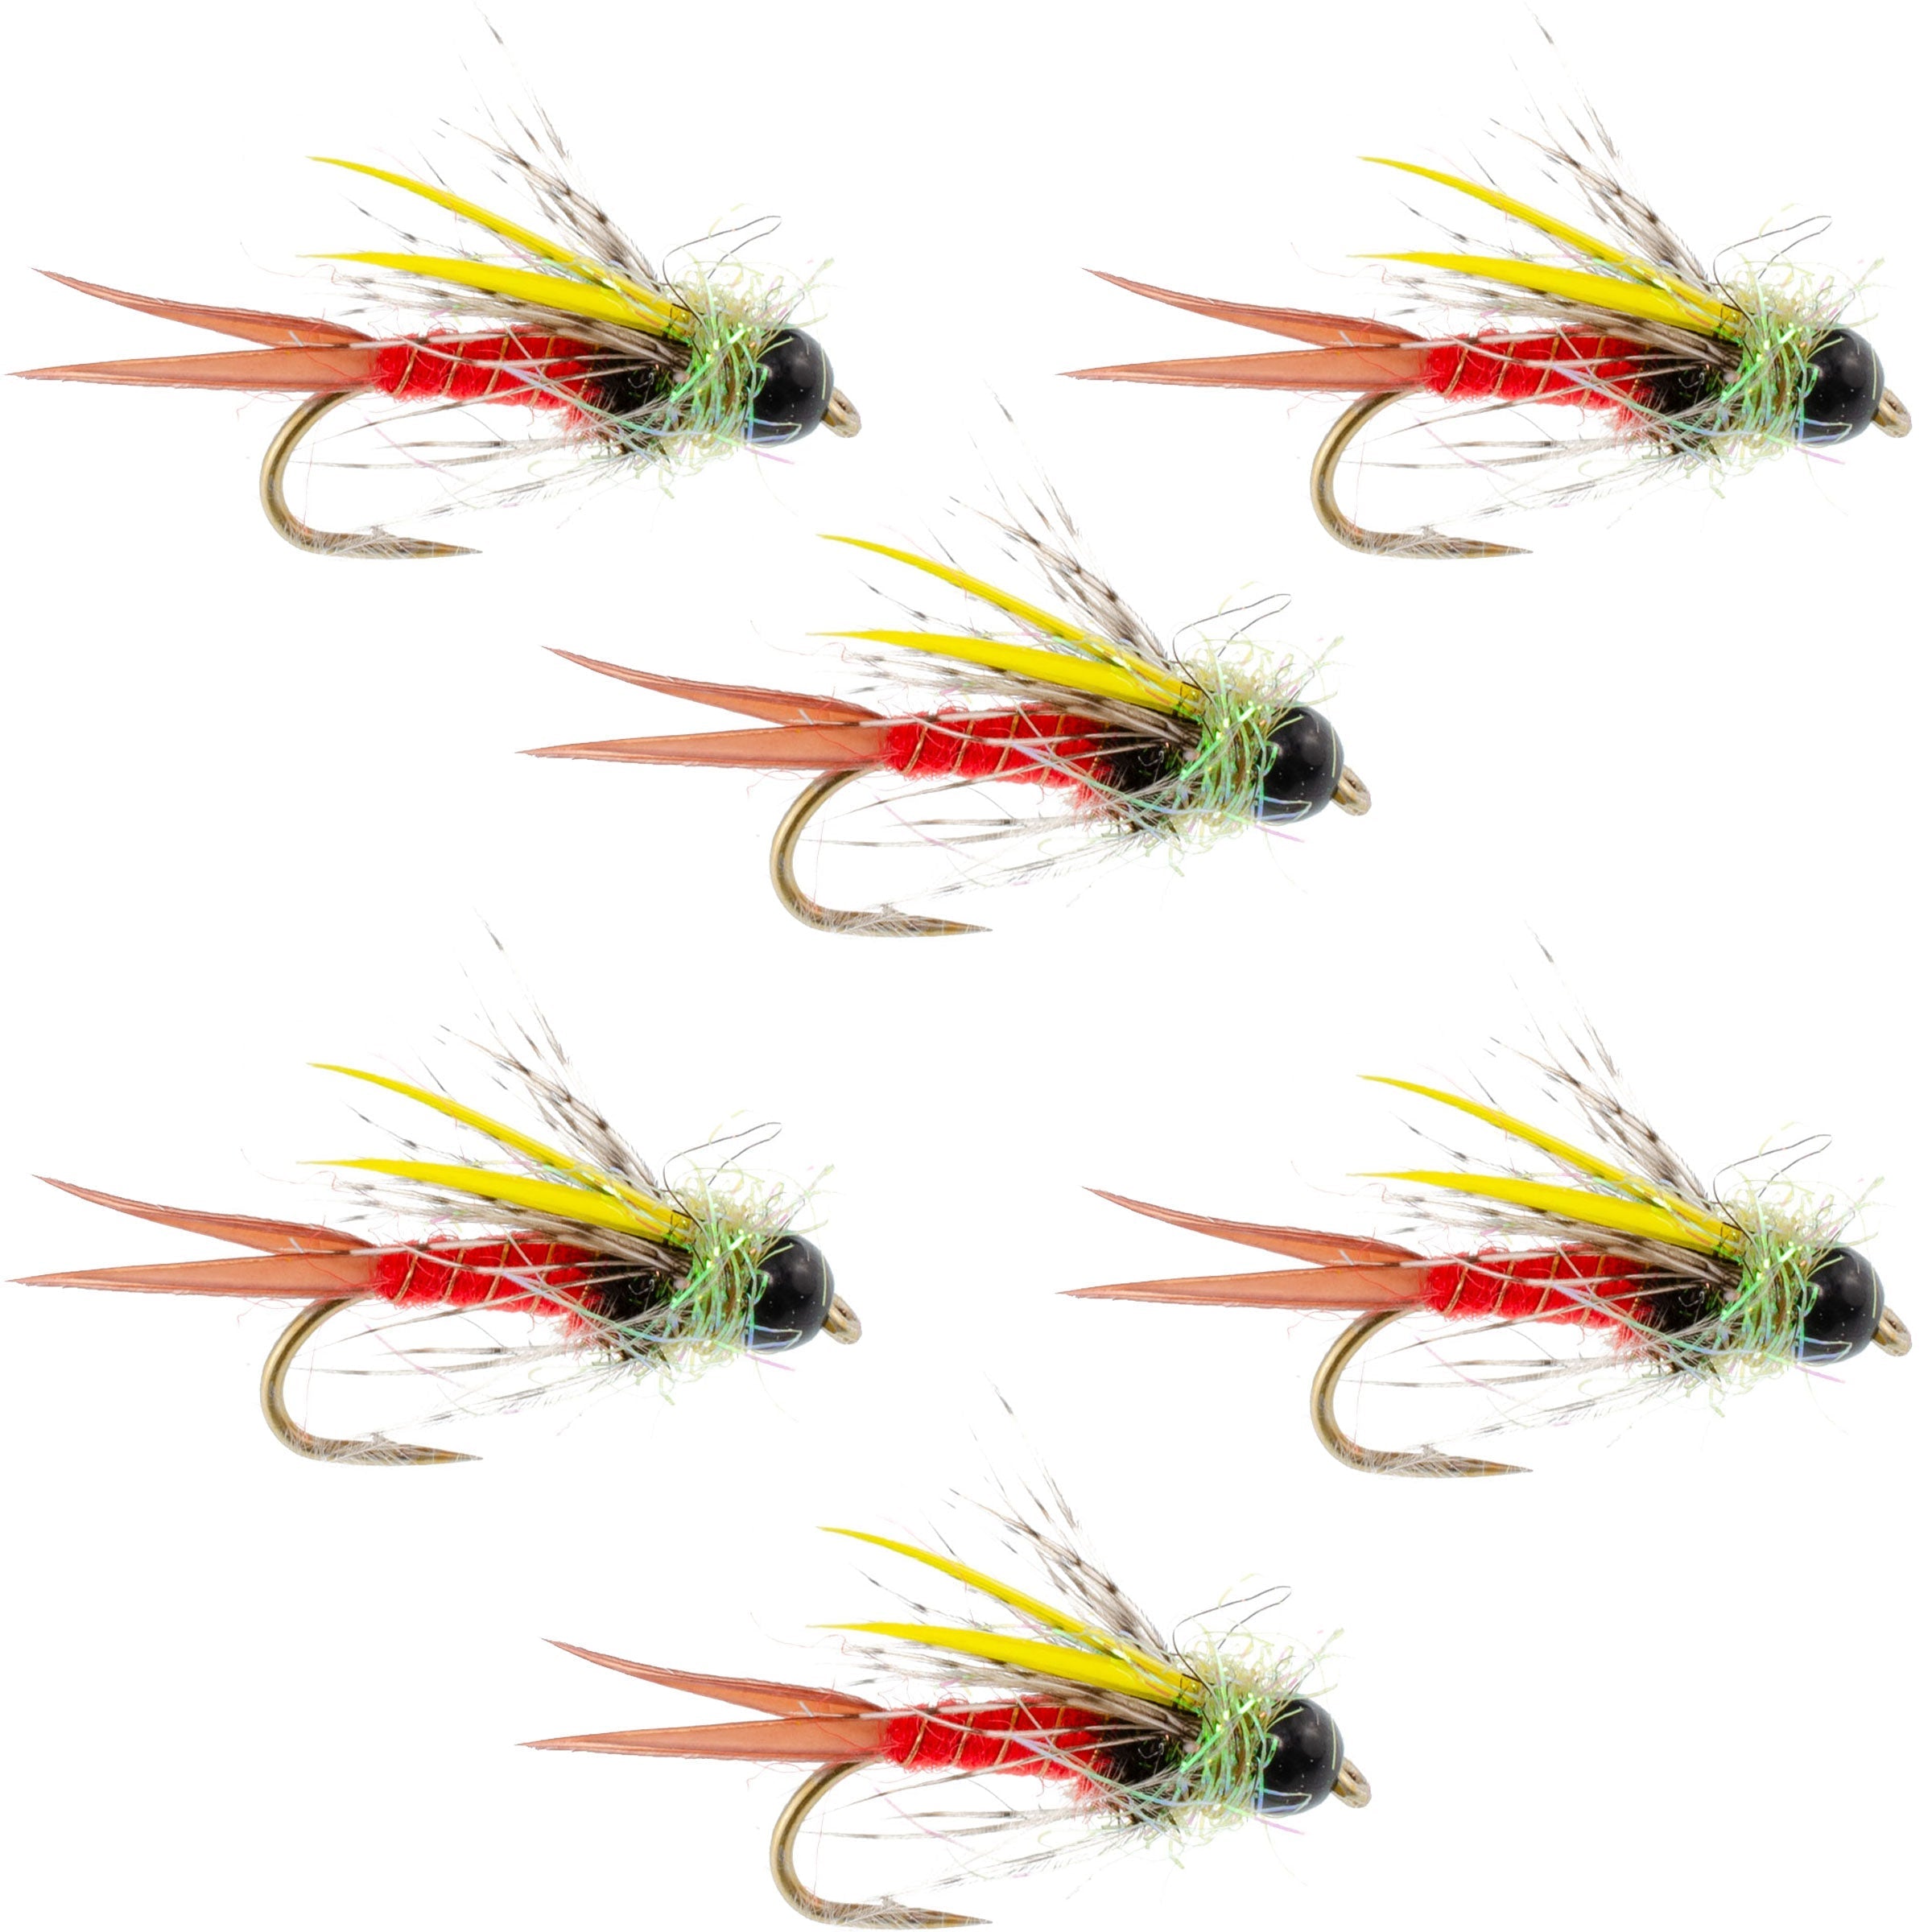 Tungsten Bead Head Nicks Prince Special Nymph Fly Fishing Flies - Set of 6 Flies Hook Size 14